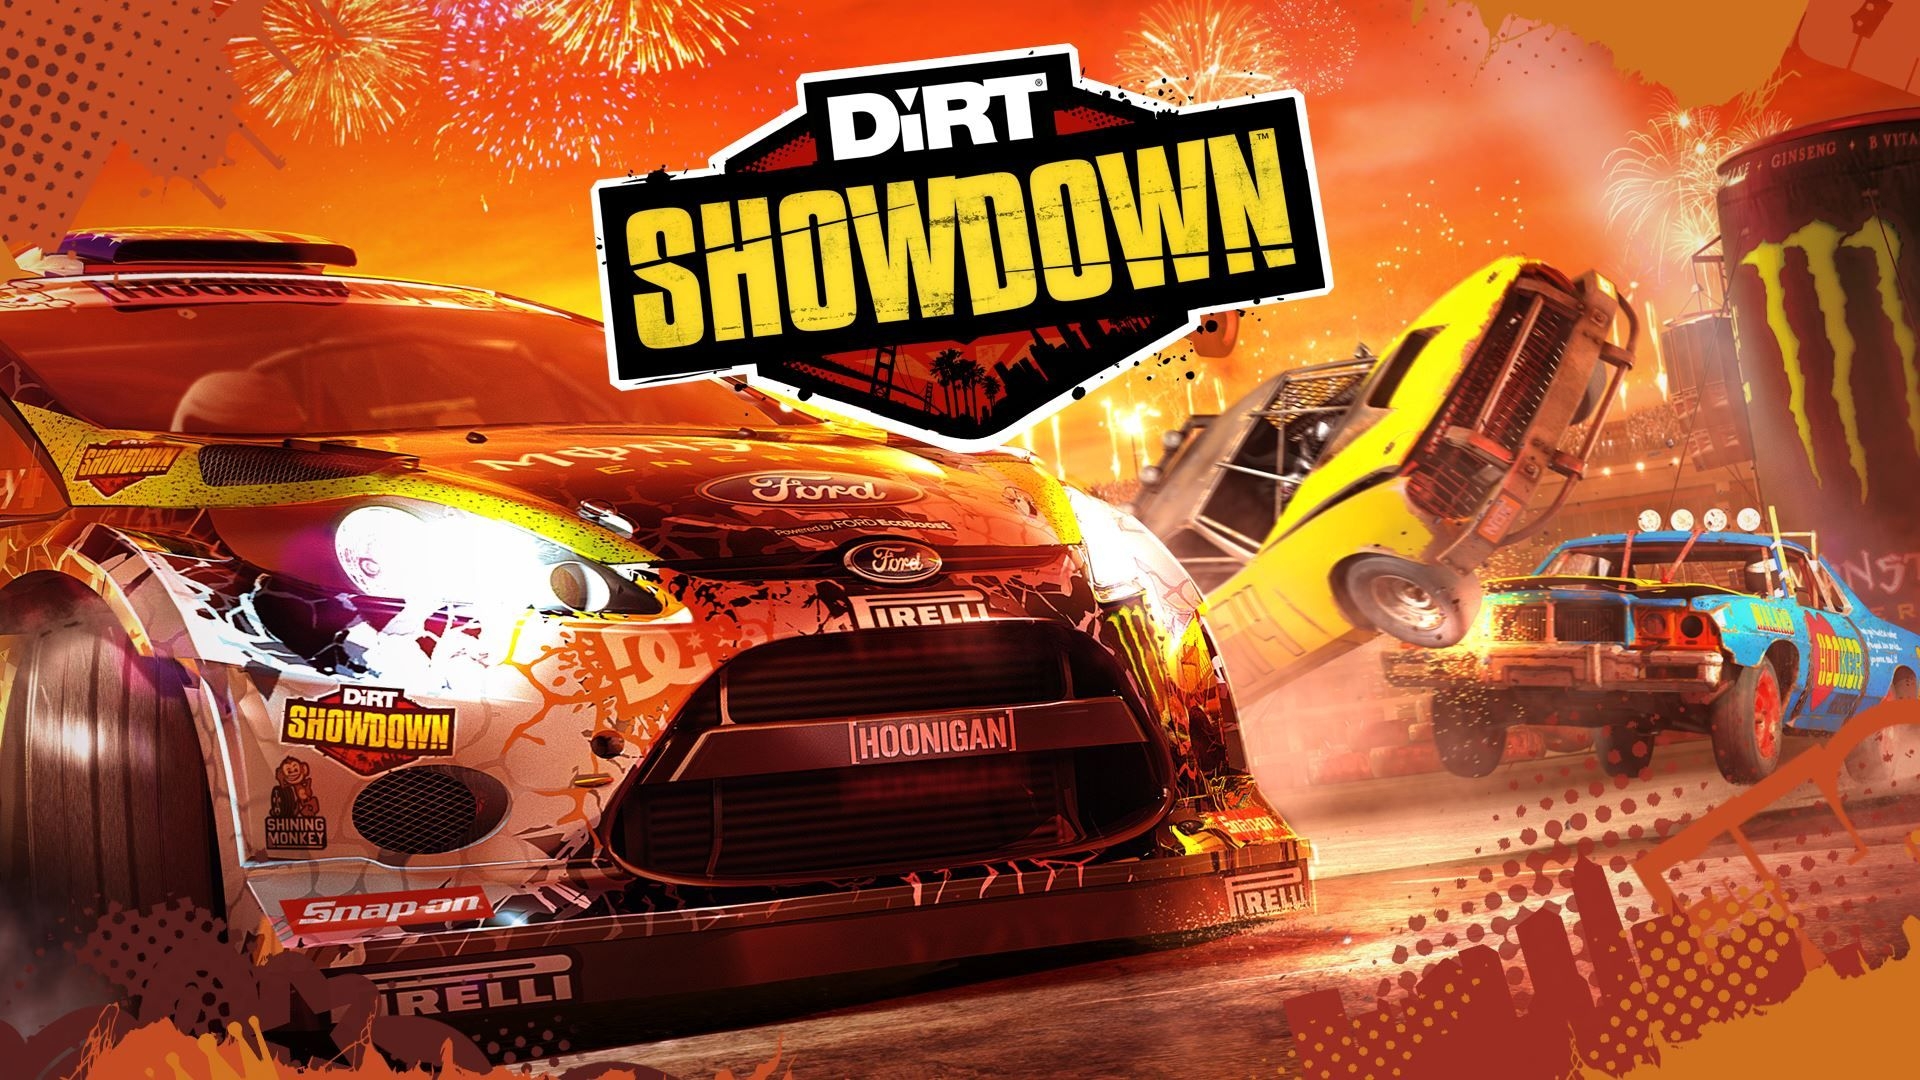 dirt 3 pc game product key